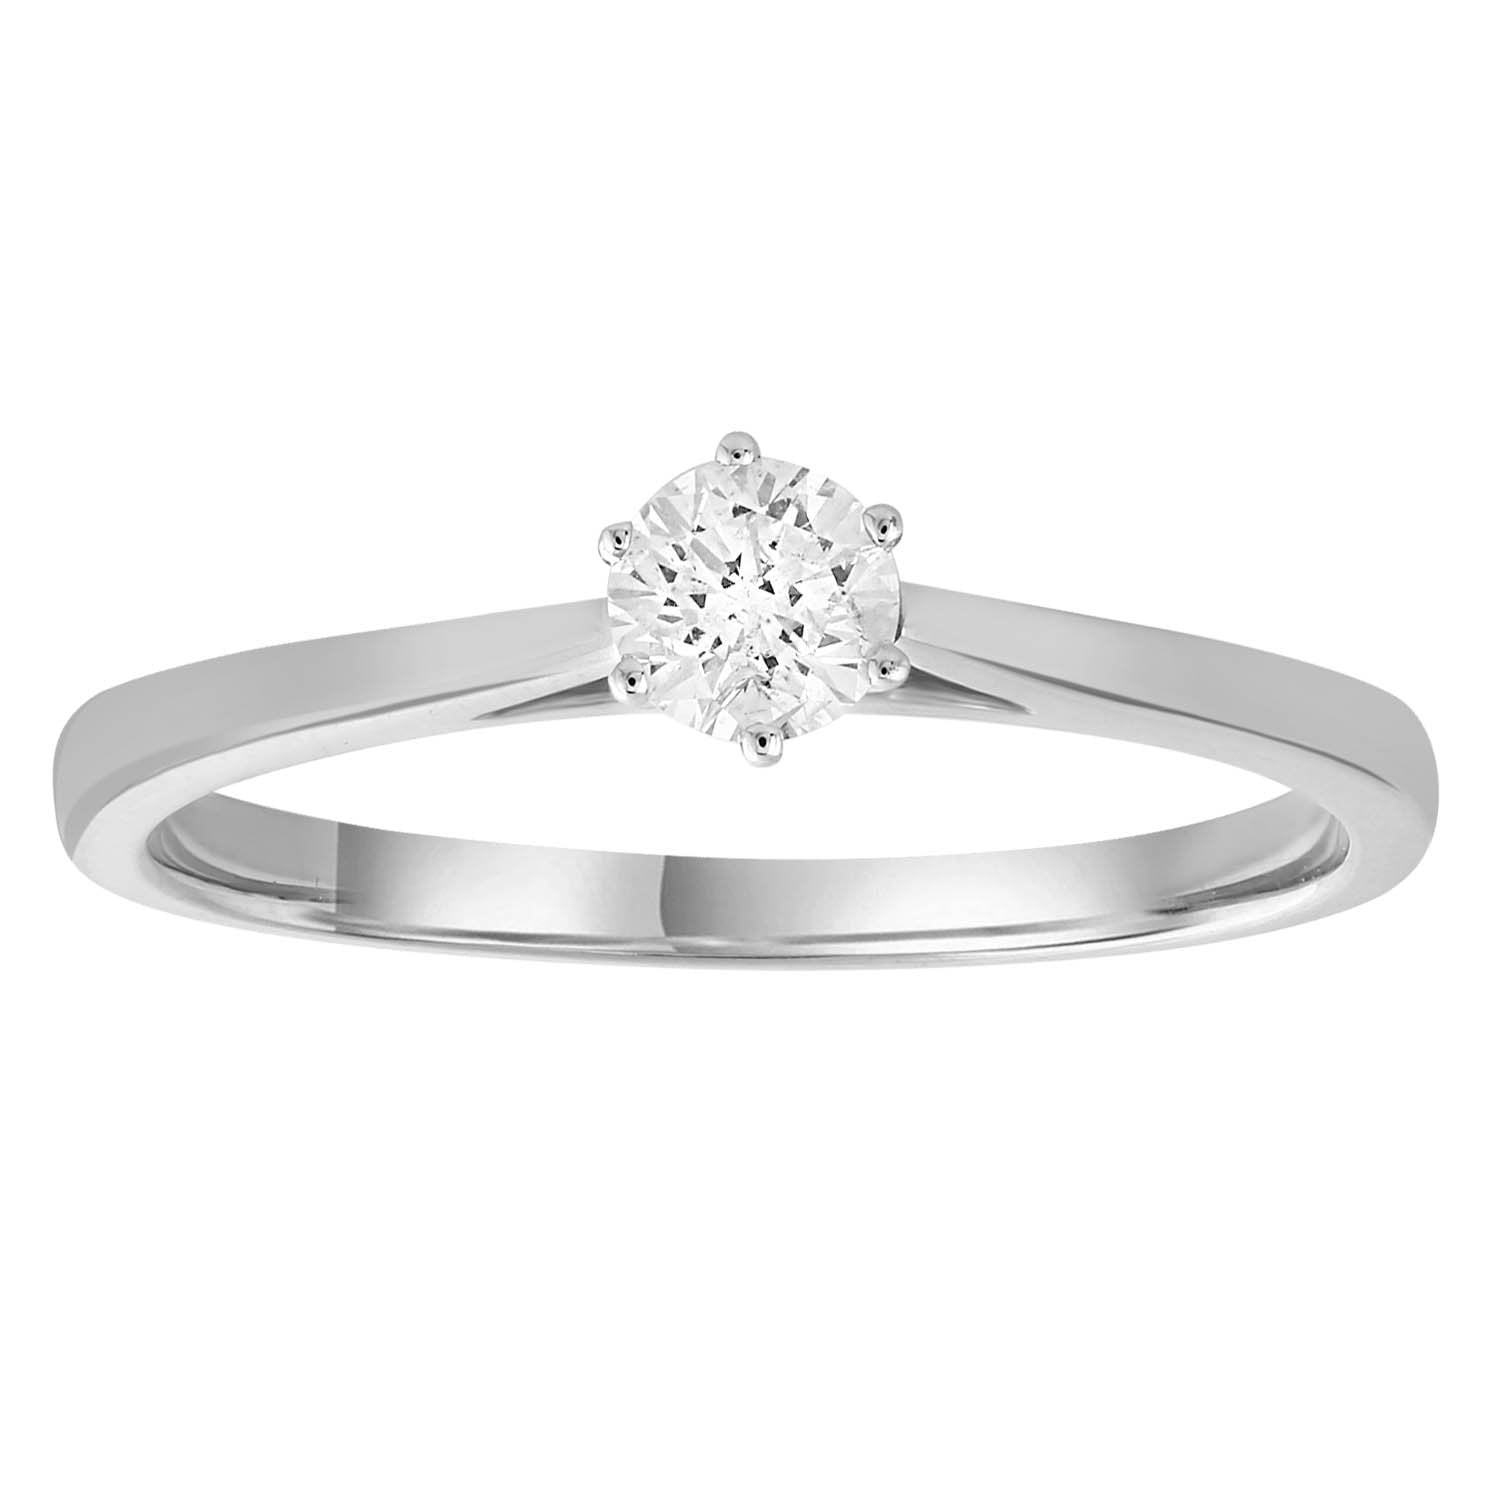 Solitaire Ring with 0.25ct Diamonds in 9K White Gold